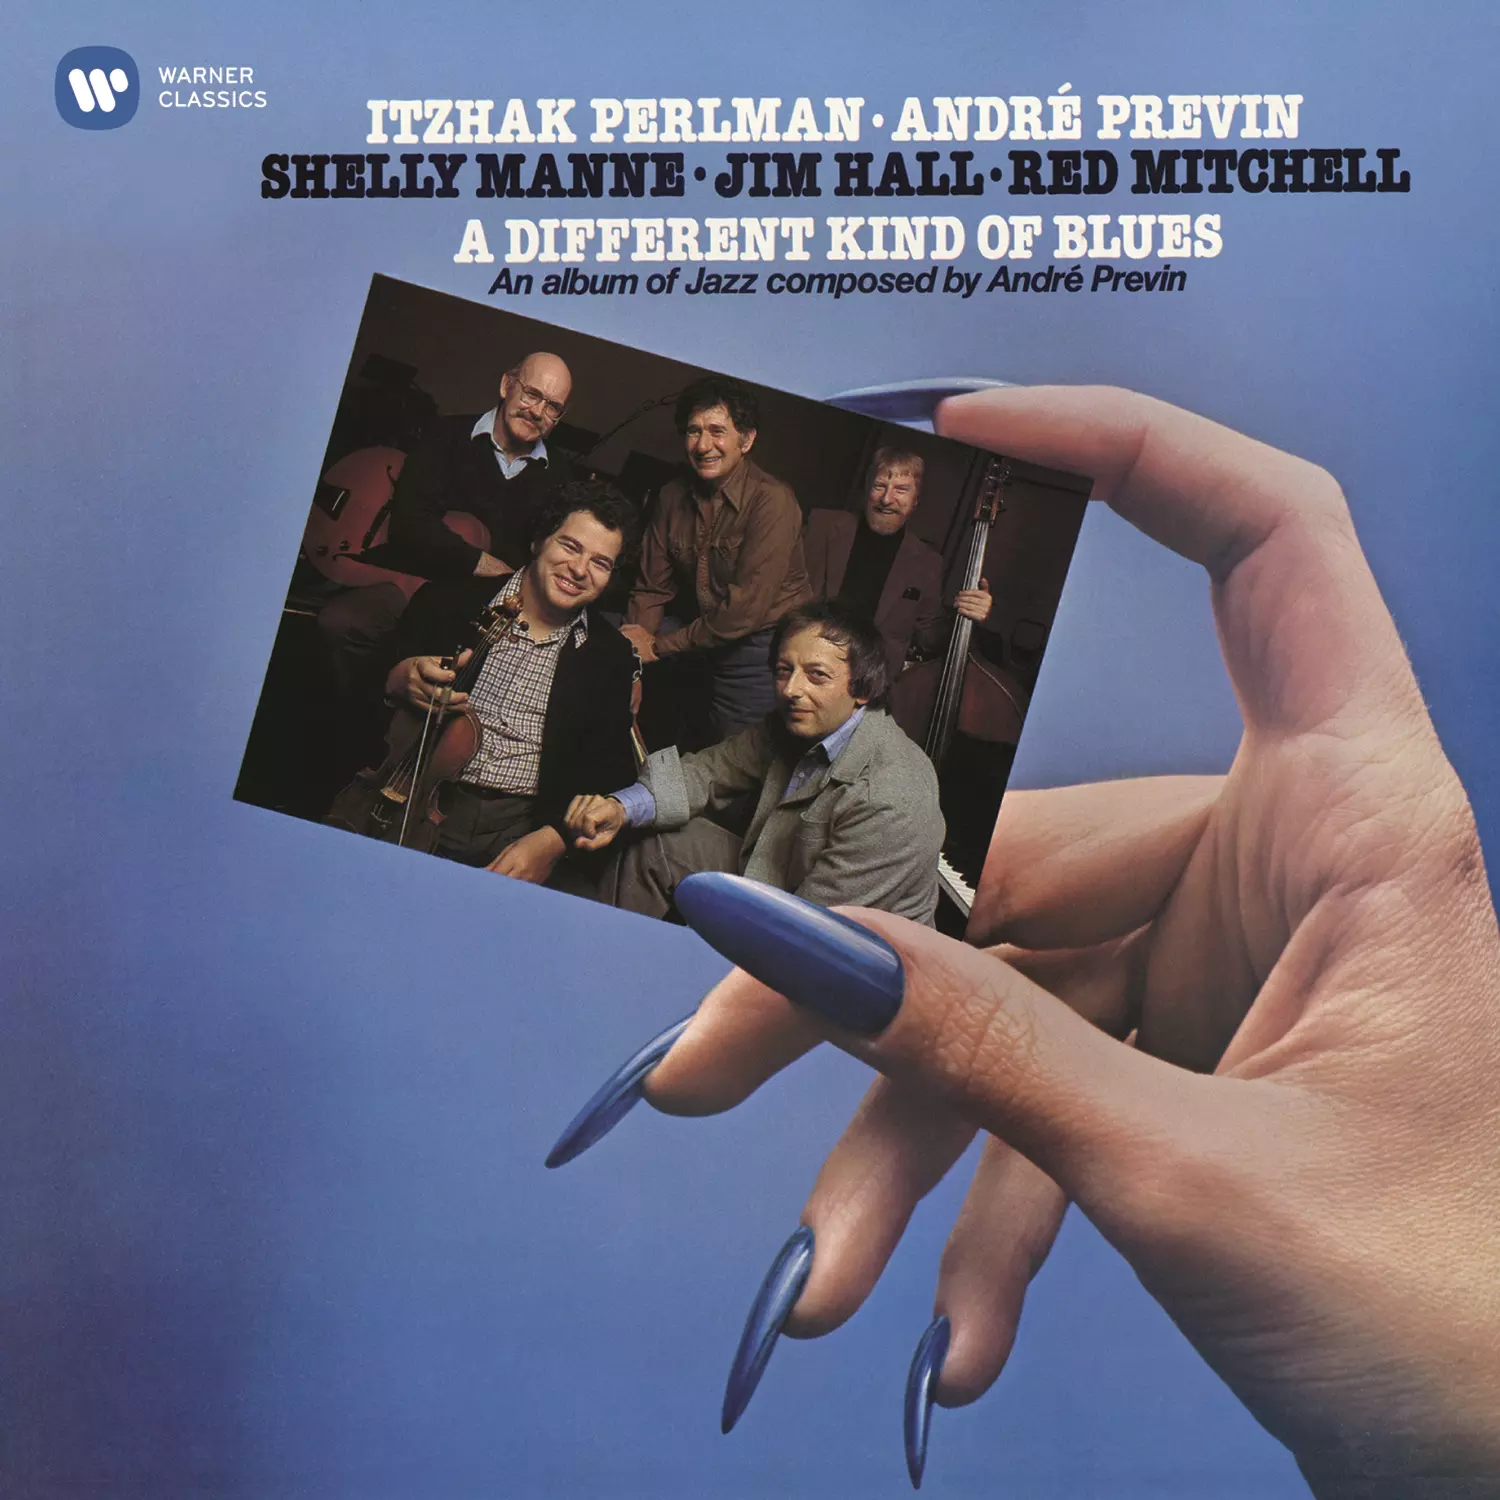 Previn: A Different Kind of Blues & It's a Breeze